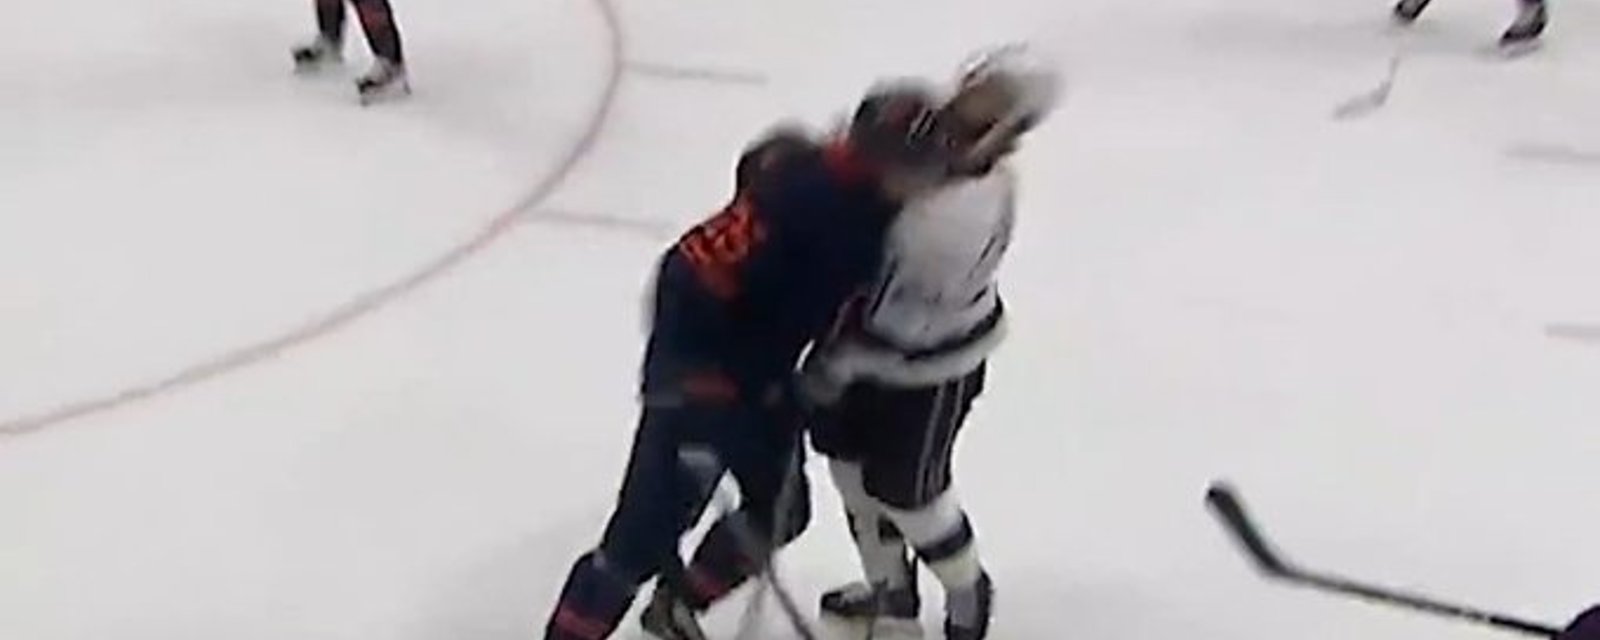 NHL comes down on Darnell Nurse, huge blow for Oilers